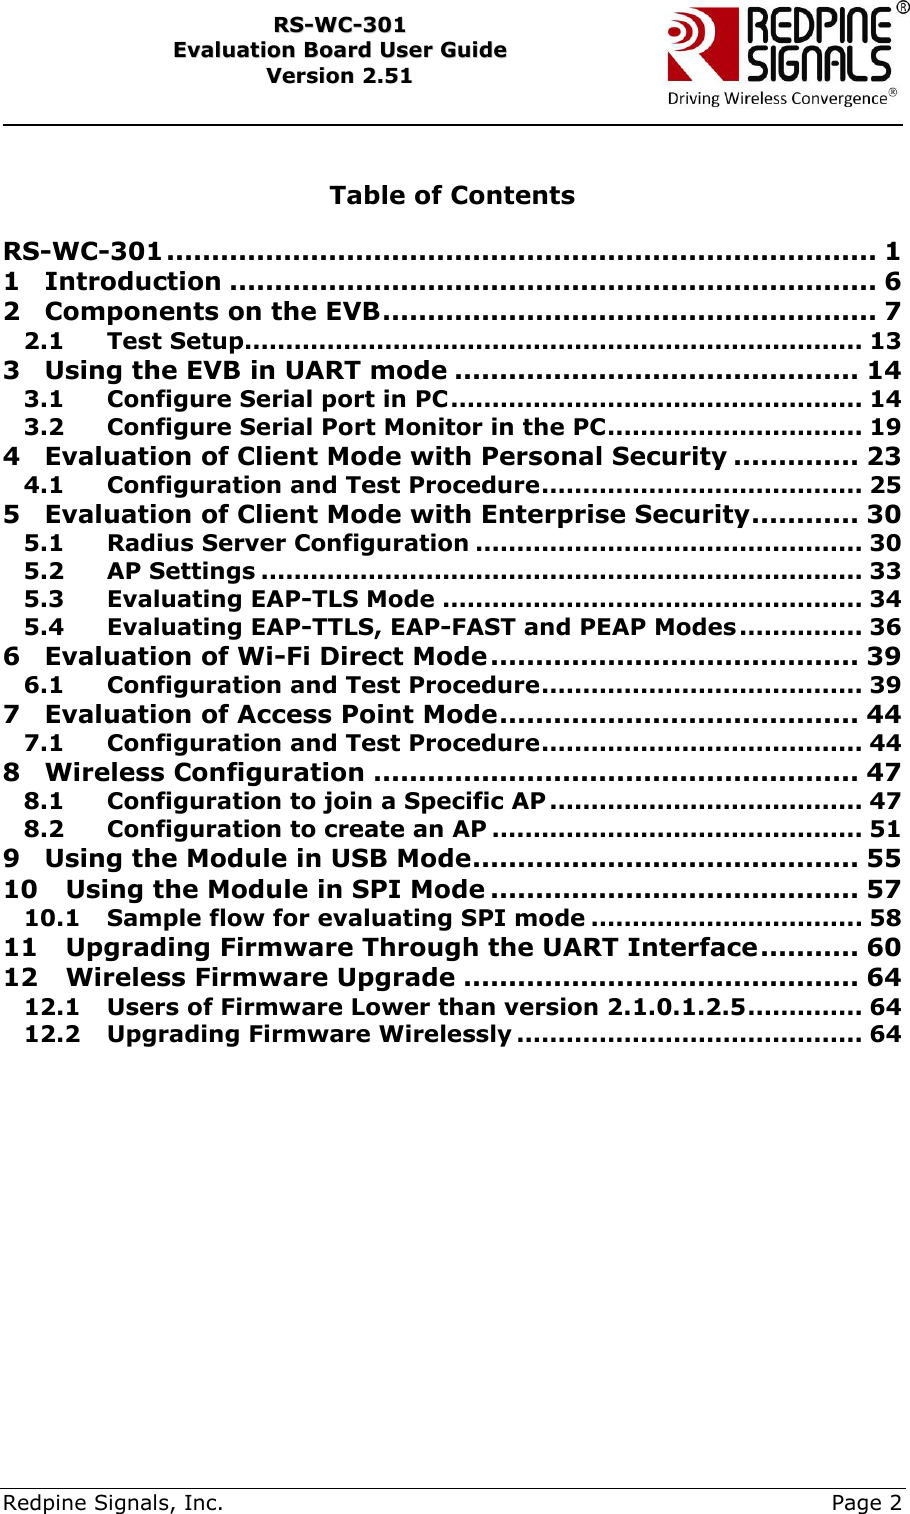     Redpine Signals, Inc.     Page 2 RRSS--WWCC--330011    EEvvaalluuaattiioonn  BBooaarrdd  UUsseerr  GGuuiiddee  VVeerrssiioonn  22..5511     Table of Contents  RS-WC-301 ............................................................................... 1 1 Introduction ........................................................................ 6 2 Components on the EVB ....................................................... 7 2.1 Test Setup ........................................................................... 13 3 Using the EVB in UART mode ............................................. 14 3.1 Configure Serial port in PC .................................................. 14 3.2 Configure Serial Port Monitor in the PC ............................... 19 4 Evaluation of Client Mode with Personal Security .............. 23 4.1 Configuration and Test Procedure ....................................... 25 5 Evaluation of Client Mode with Enterprise Security ............ 30 5.1 Radius Server Configuration ............................................... 30 5.2 AP Settings ......................................................................... 33 5.3 Evaluating EAP-TLS Mode ................................................... 34 5.4 Evaluating EAP-TTLS, EAP-FAST and PEAP Modes ............... 36 6 Evaluation of Wi-Fi Direct Mode ......................................... 39 6.1 Configuration and Test Procedure ....................................... 39 7 Evaluation of Access Point Mode ........................................ 44 7.1 Configuration and Test Procedure ....................................... 44 8 Wireless Configuration ...................................................... 47 8.1 Configuration to join a Specific AP ...................................... 47 8.2 Configuration to create an AP ............................................. 51 9 Using the Module in USB Mode ........................................... 55 10 Using the Module in SPI Mode ......................................... 57 10.1 Sample flow for evaluating SPI mode ................................. 58 11 Upgrading Firmware Through the UART Interface ........... 60 12 Wireless Firmware Upgrade ............................................ 64 12.1 Users of Firmware Lower than version 2.1.0.1.2.5 .............. 64 12.2 Upgrading Firmware Wirelessly .......................................... 64 